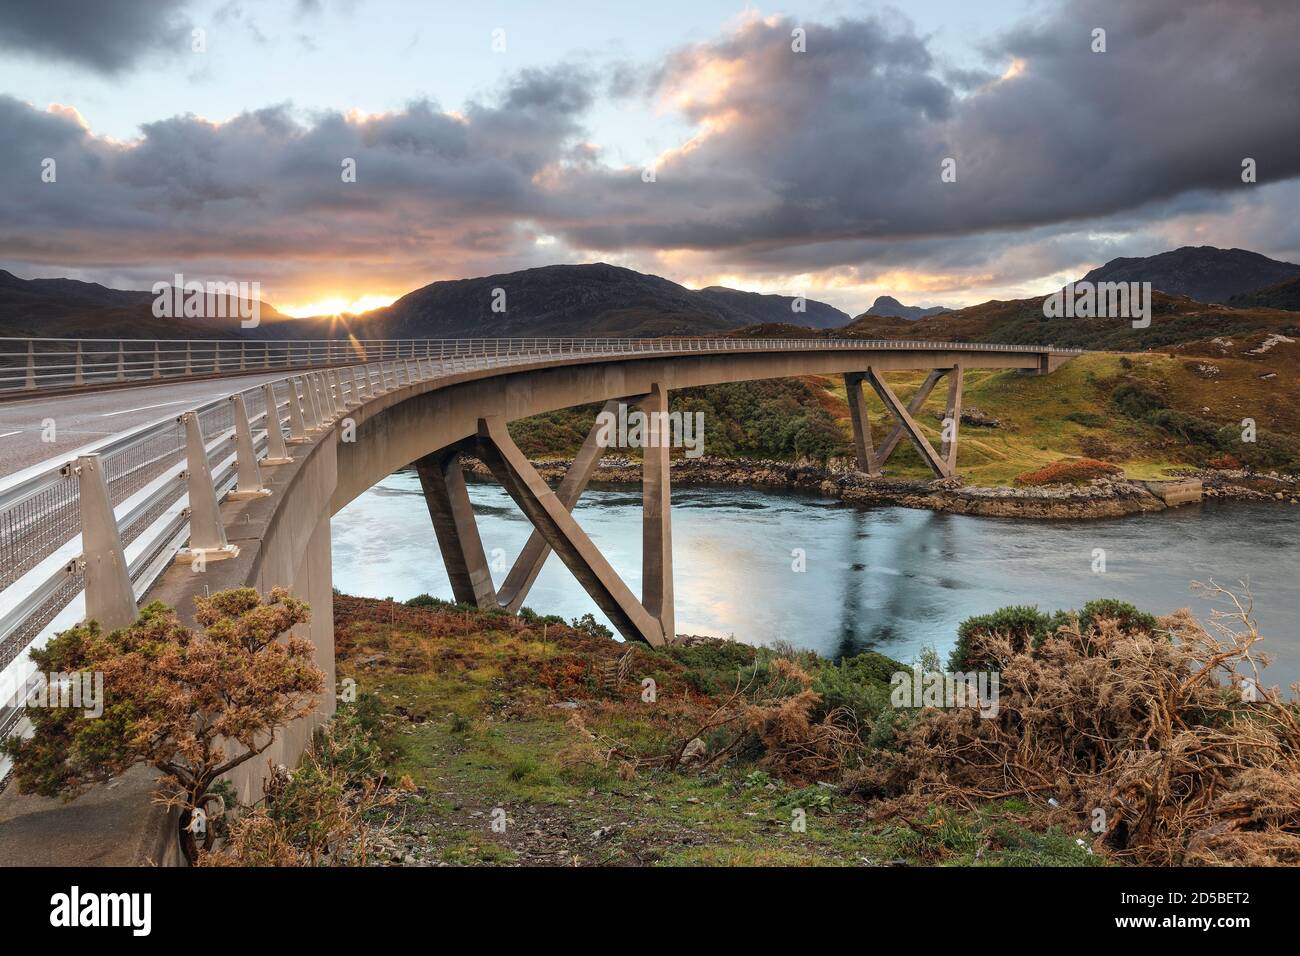 The Kylesku Bridge on North Coast 500 Tourist Route which Spans the Sea Loch of Caolas Cumhann, Sutherland, NW Highlands of Scotland, UK Stock Photo